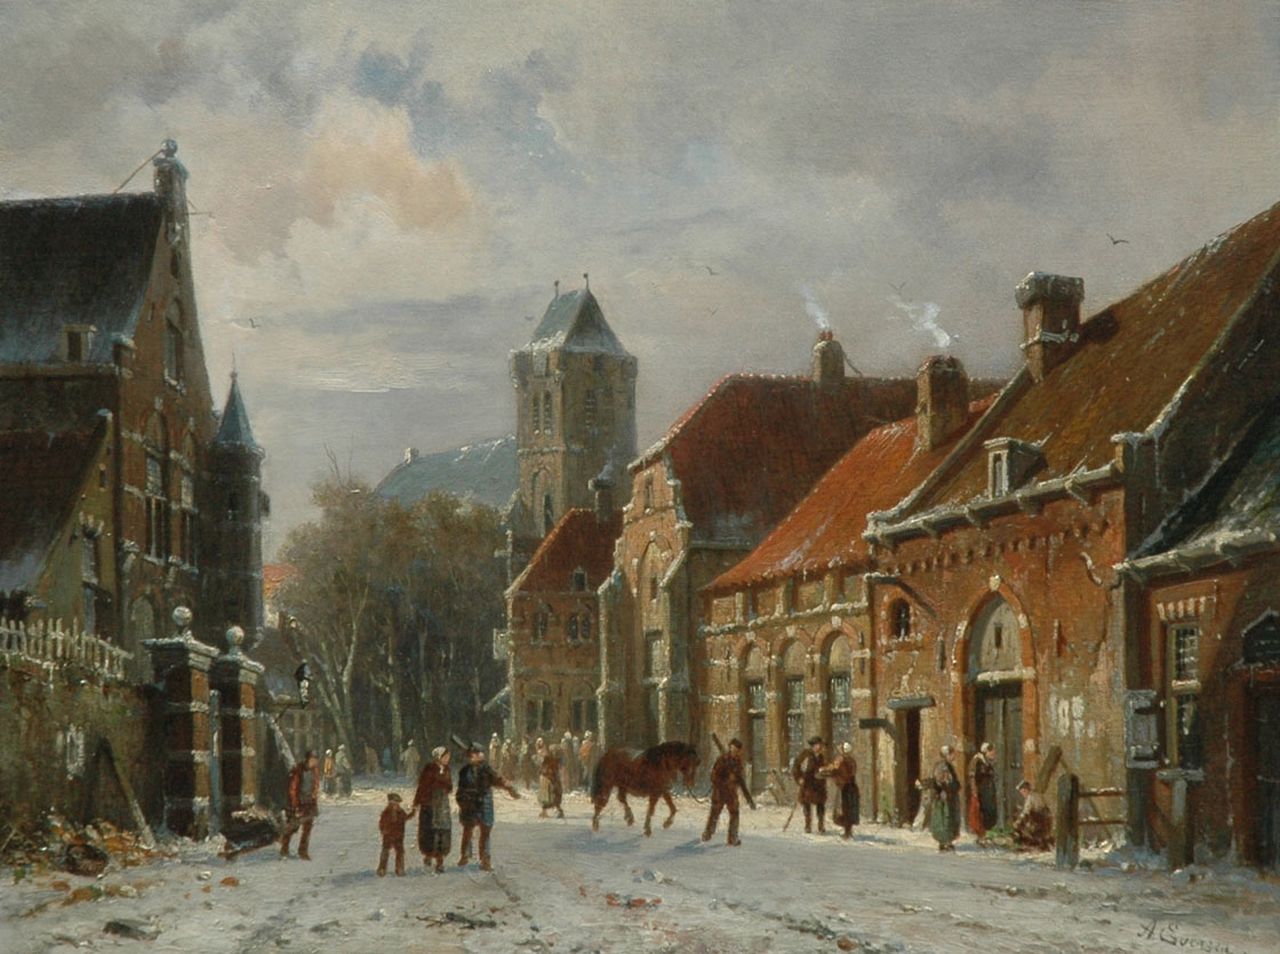 Eversen A.  | Adrianus Eversen, Townview in winter with figures, oil on canvas 31.0 x 40.6 cm, signed l.r.